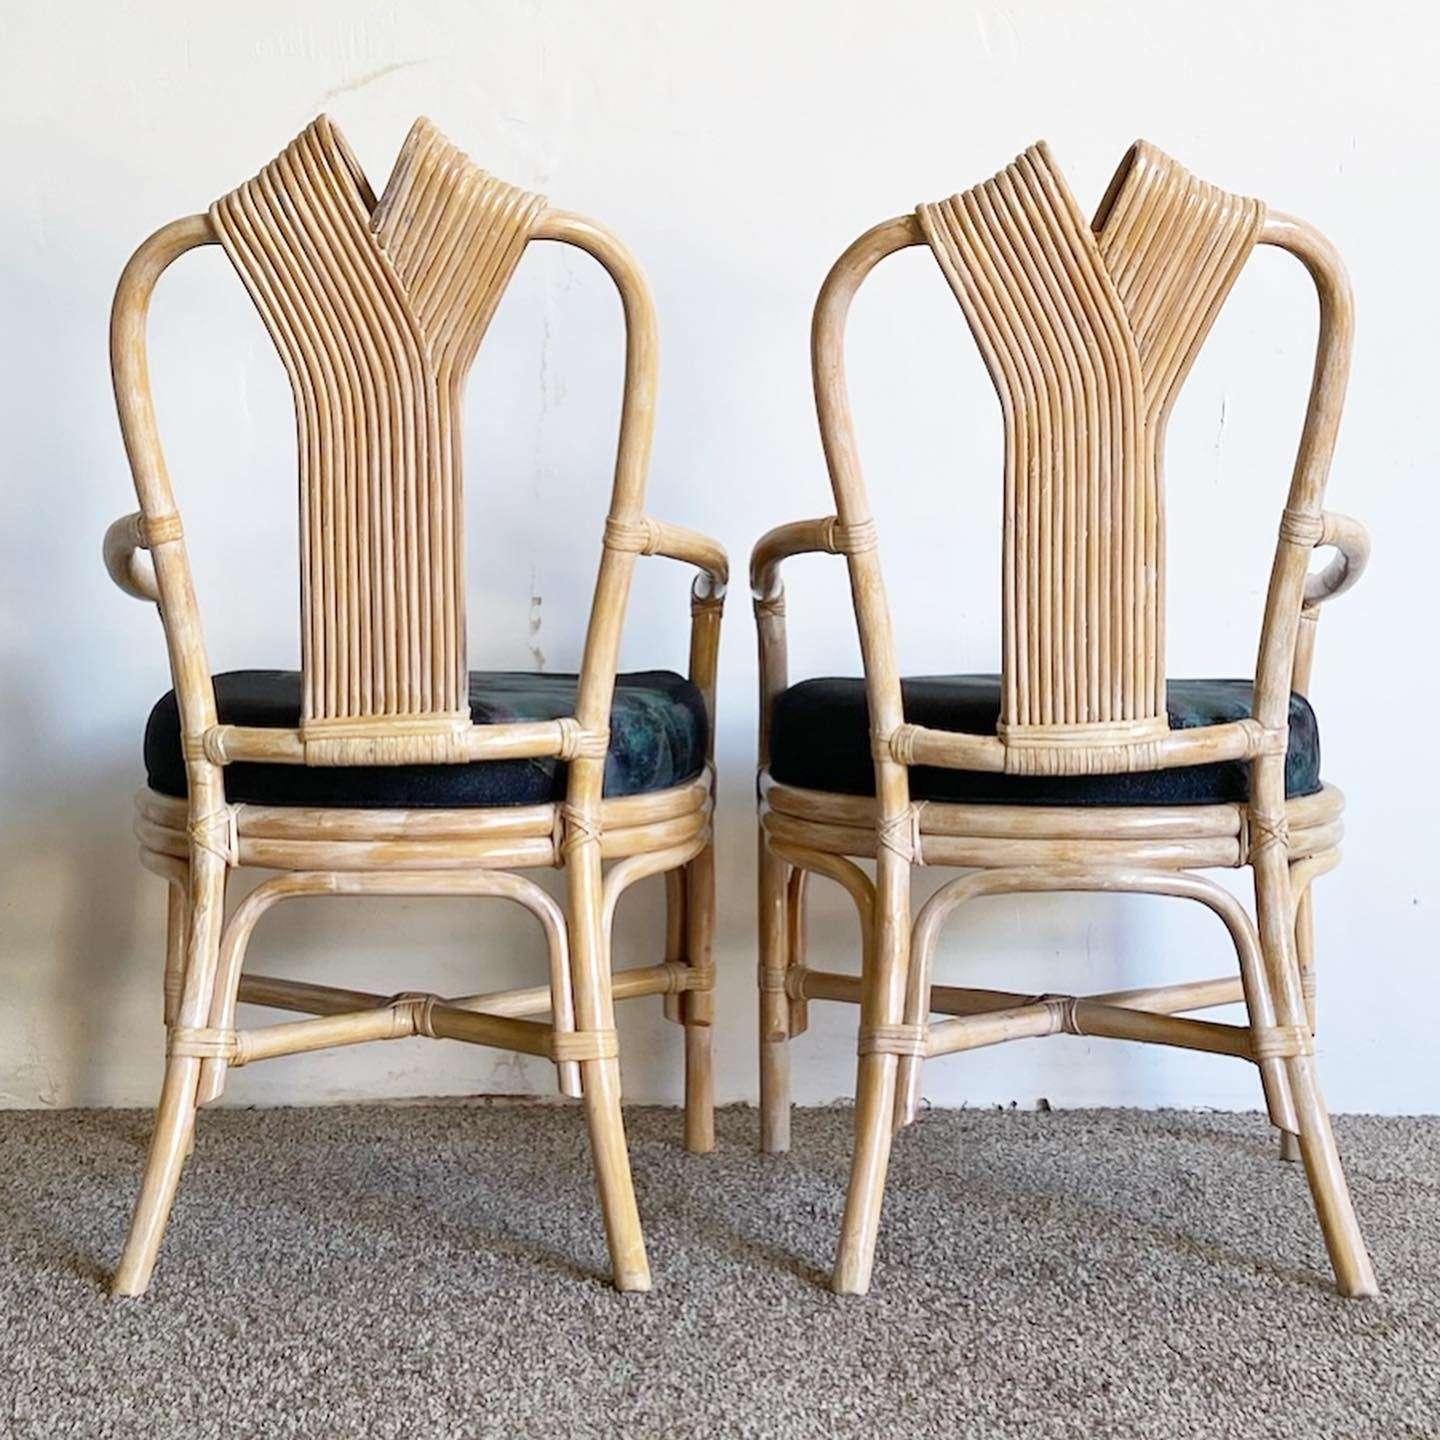 Philippine Boho Chic Bamboo Rattan and Reed Dining Chairs - Set of 6 For Sale